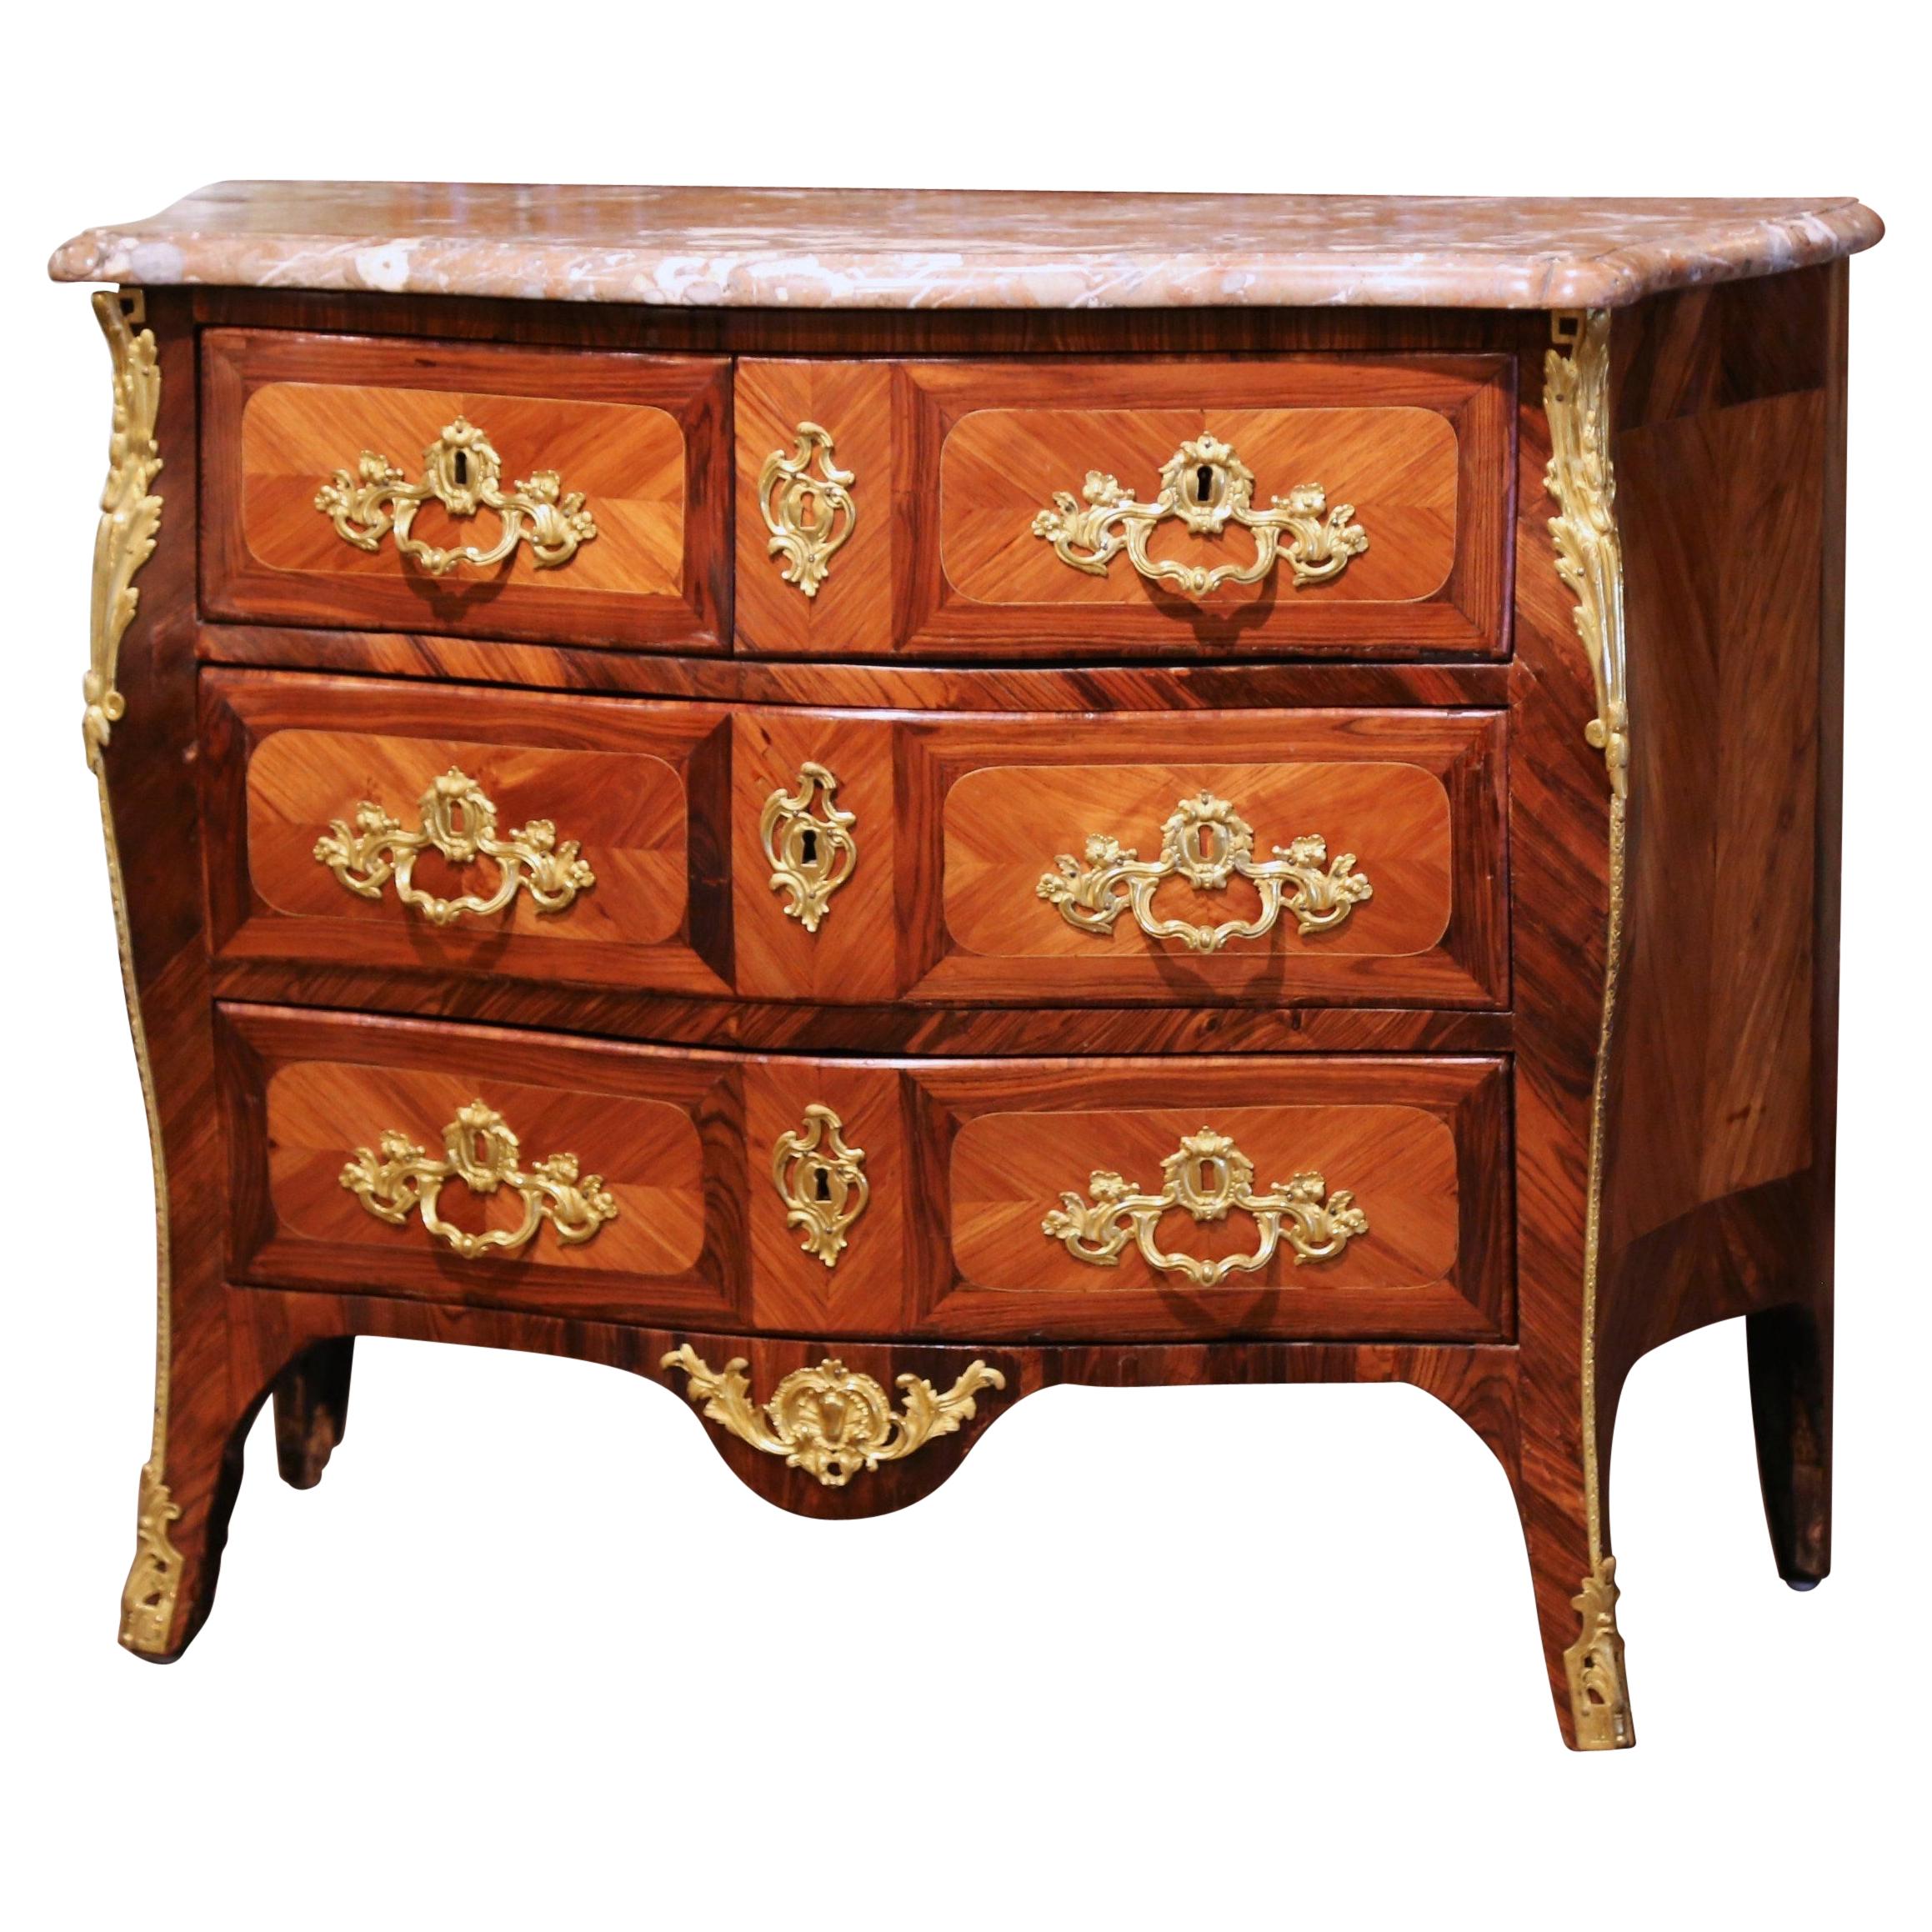 18th Century French Louis XV Walnut Inlay Bombe Chest of Drawers with Marble Top